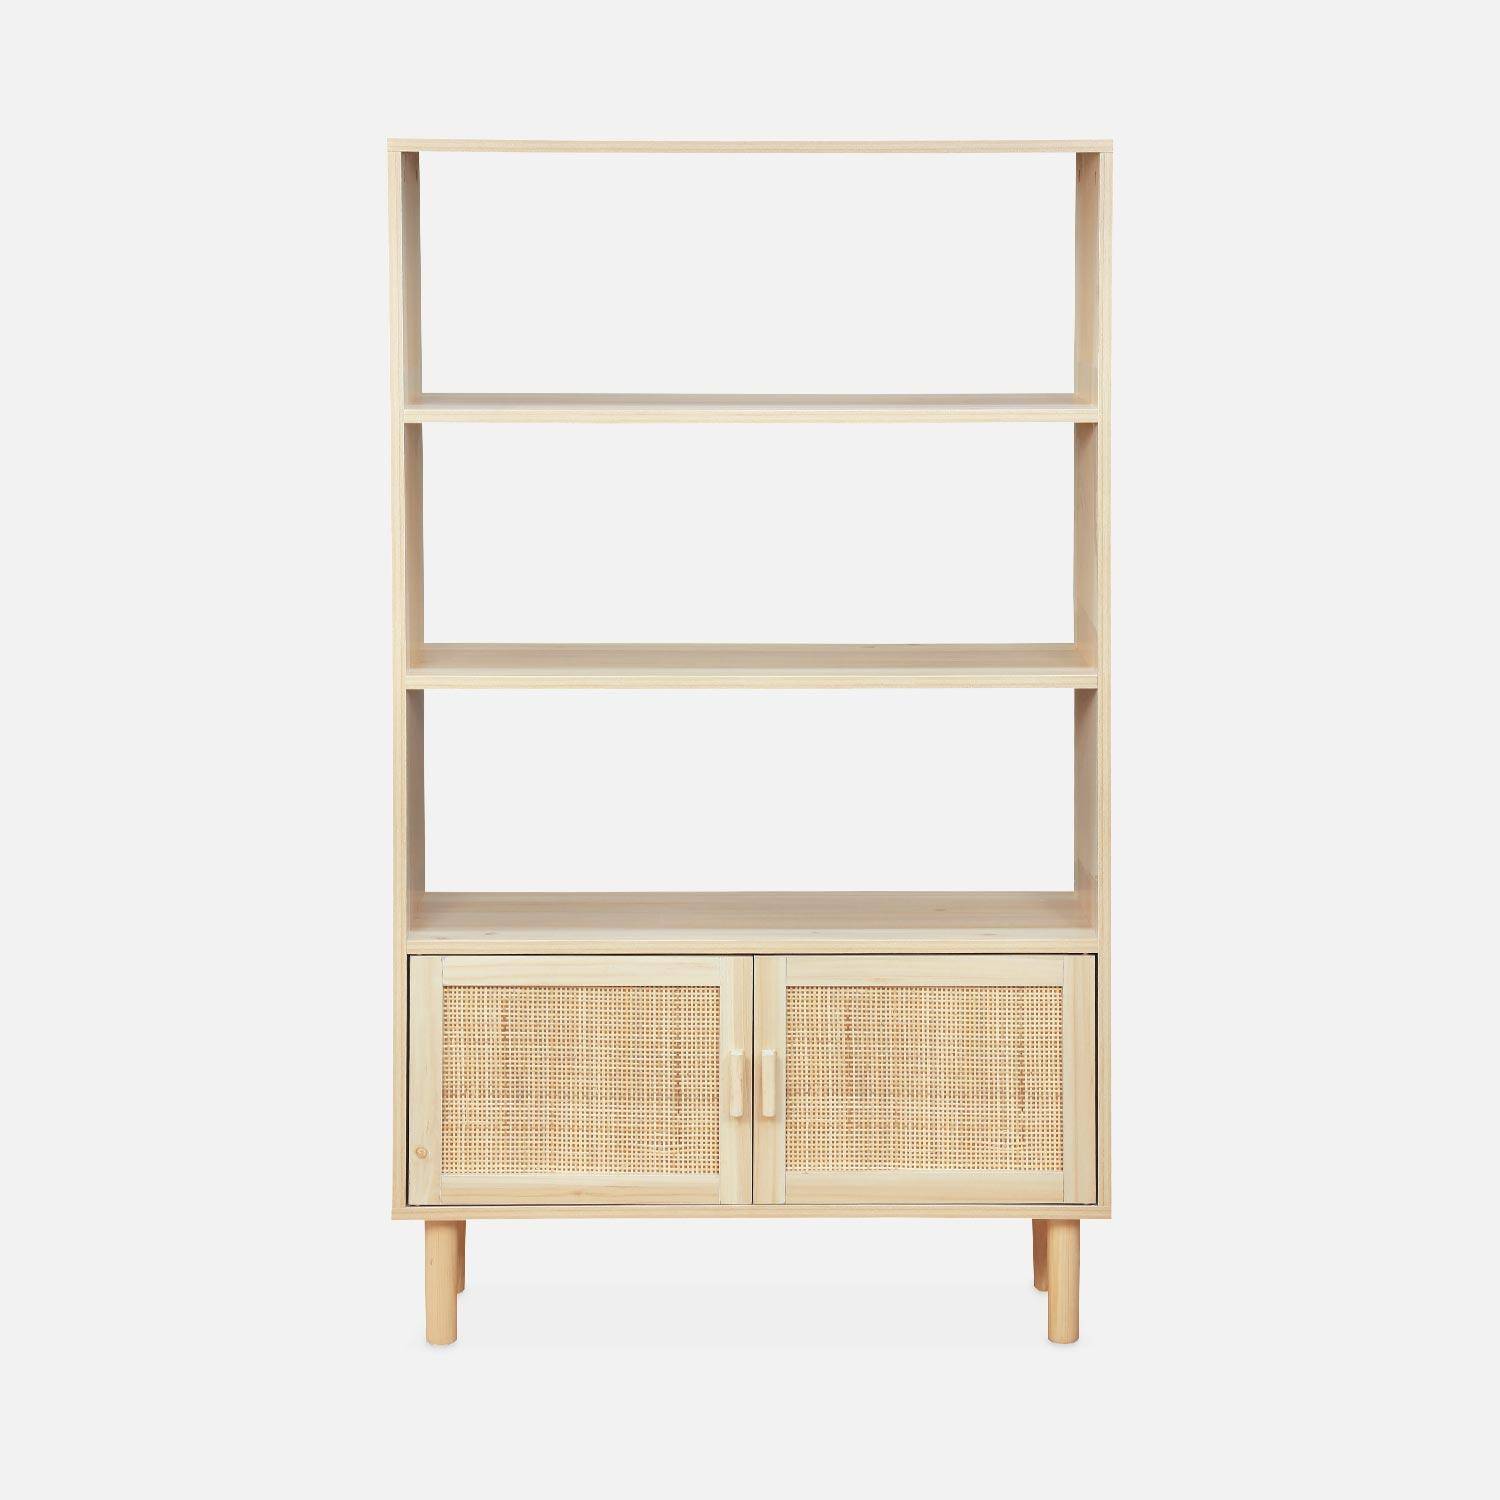 Woven rattan bookcase with storage cupboard, 3 shelves, 2 doors, 80x30x140cm - Camargue - Natural,sweeek,Photo4